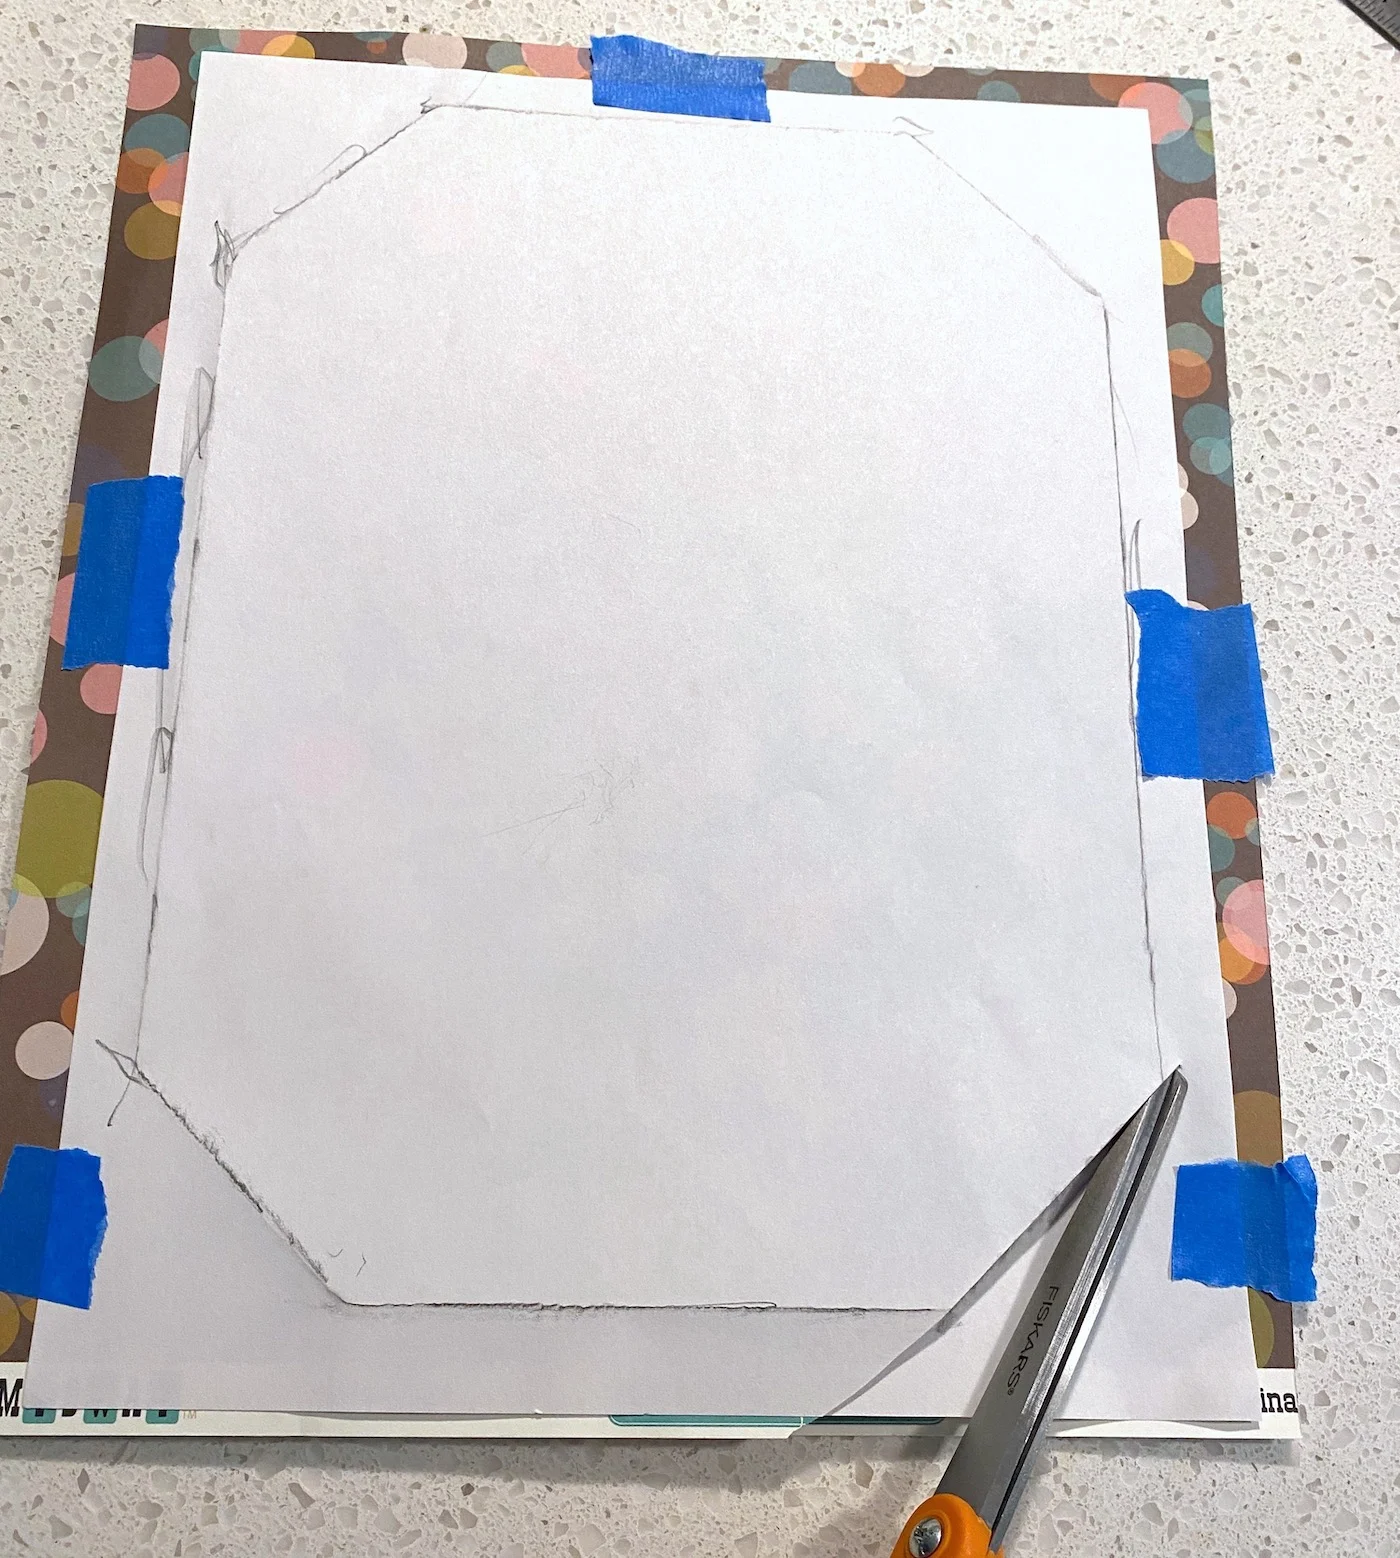 Cutting the pattern out of scrapbook paper